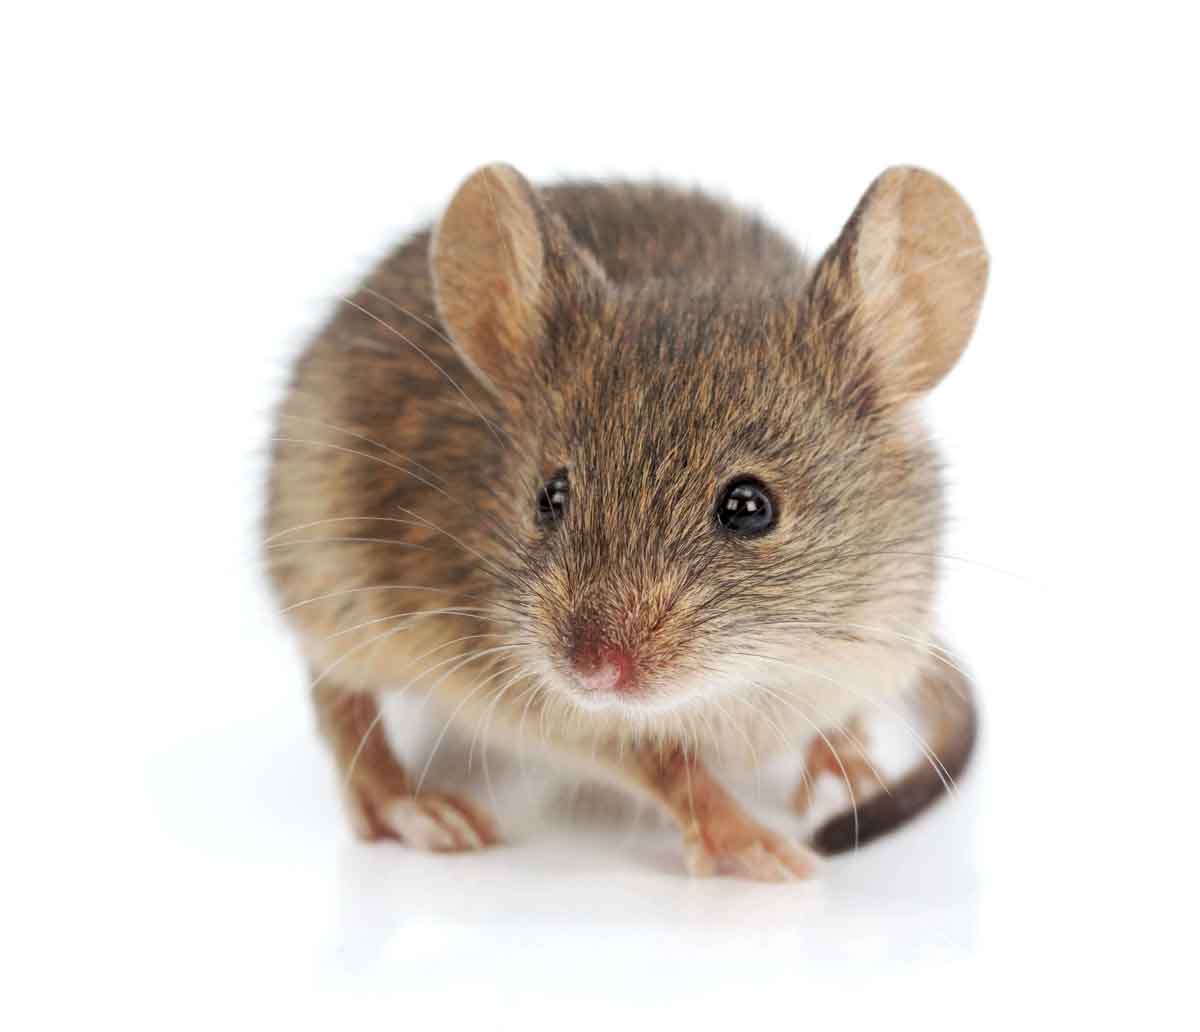 House Mouse pest control experts